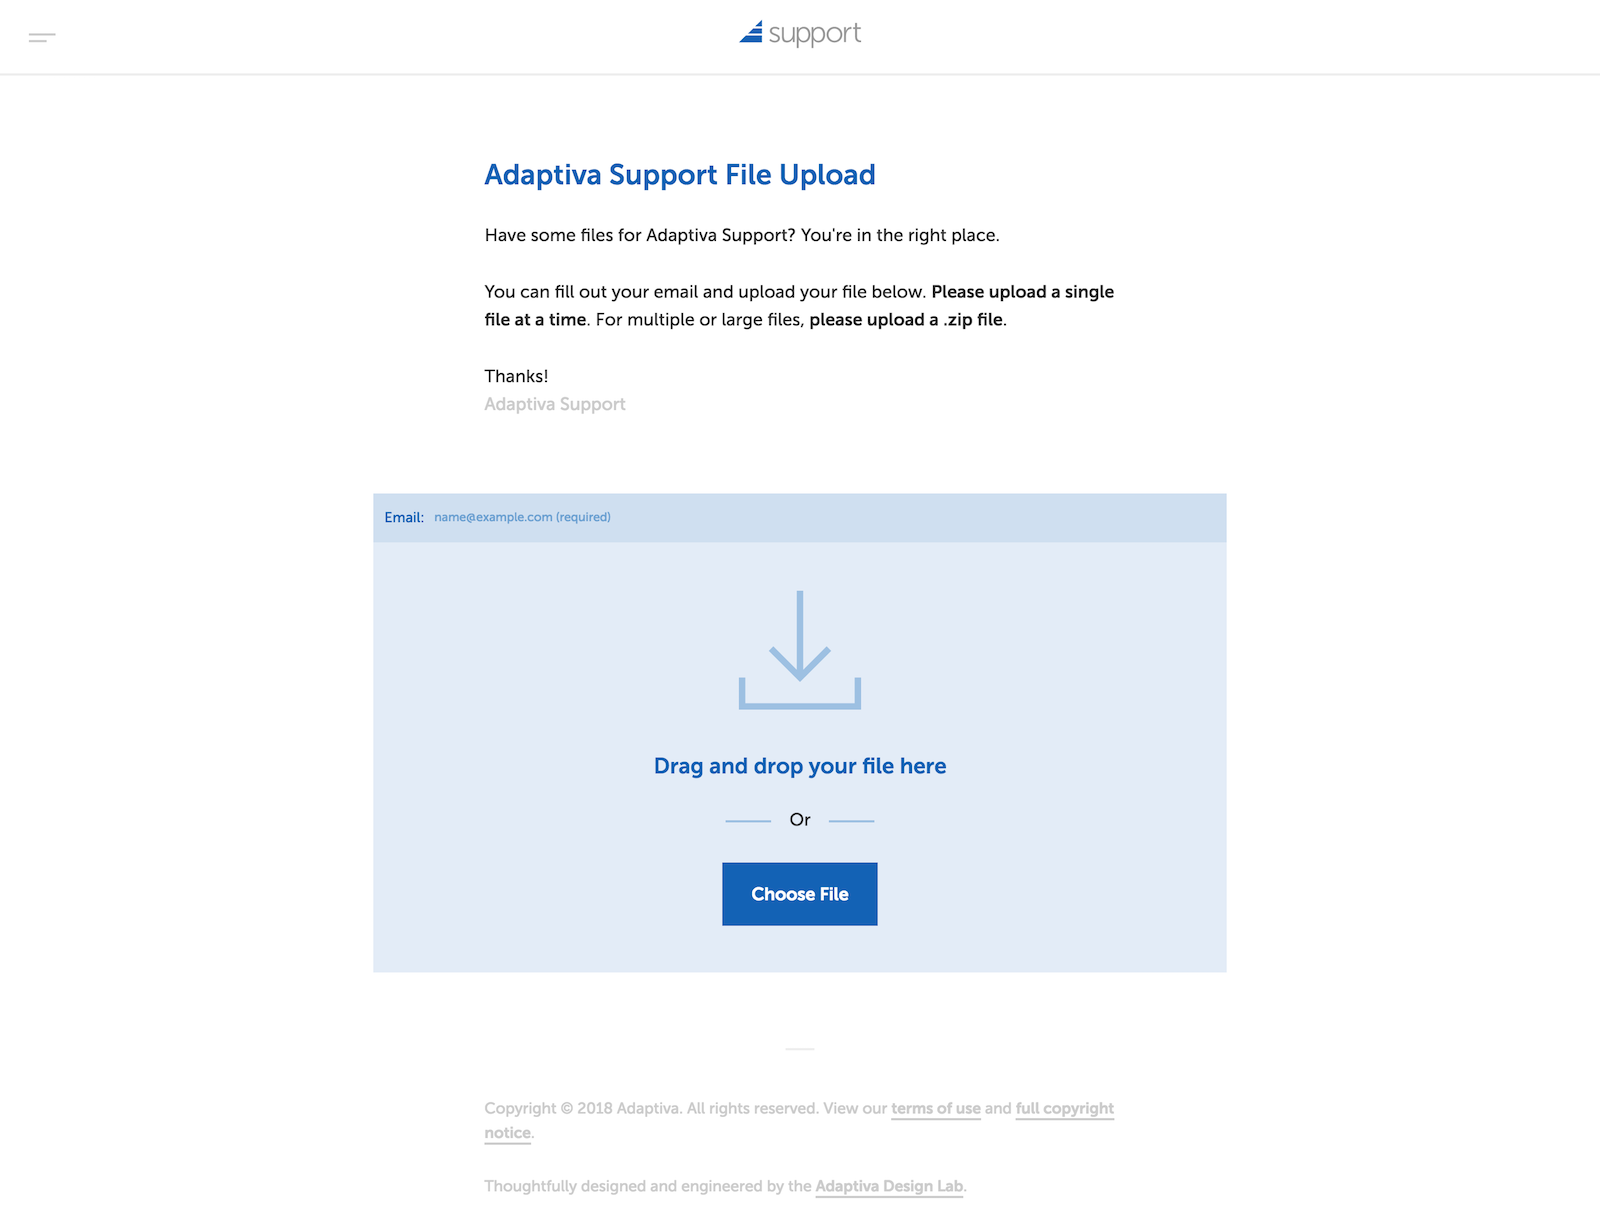 My new design for the Adaptiva support upload